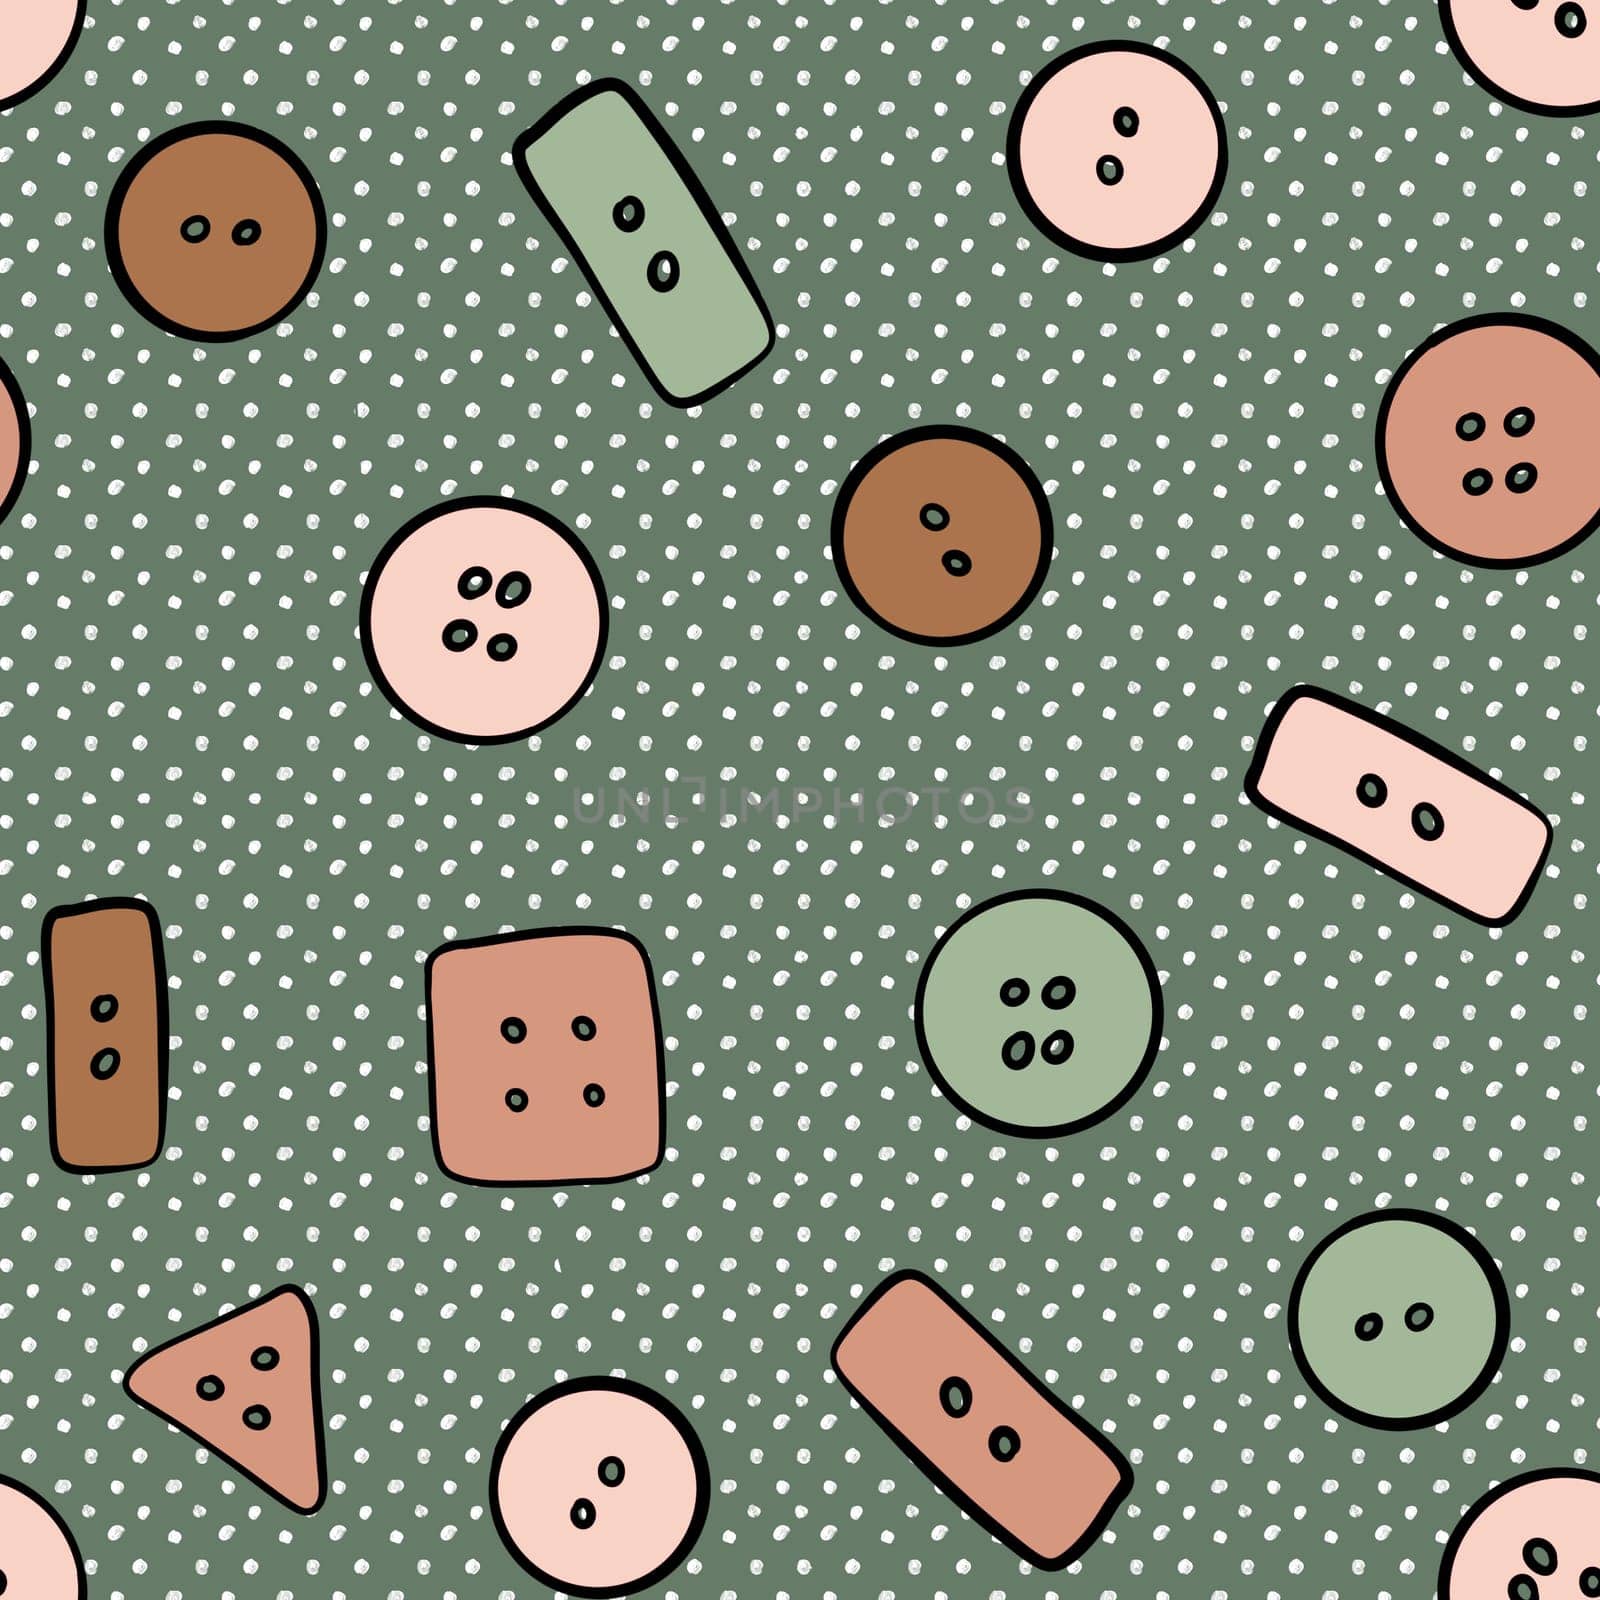 Hand drawn seamless pattern with tbeige brown button sewing crafts dressmaking items. Sage green neutral polka dot background, tailor cute sew print, handmade needwork business hobby, fabric for dresses. by Lagmar